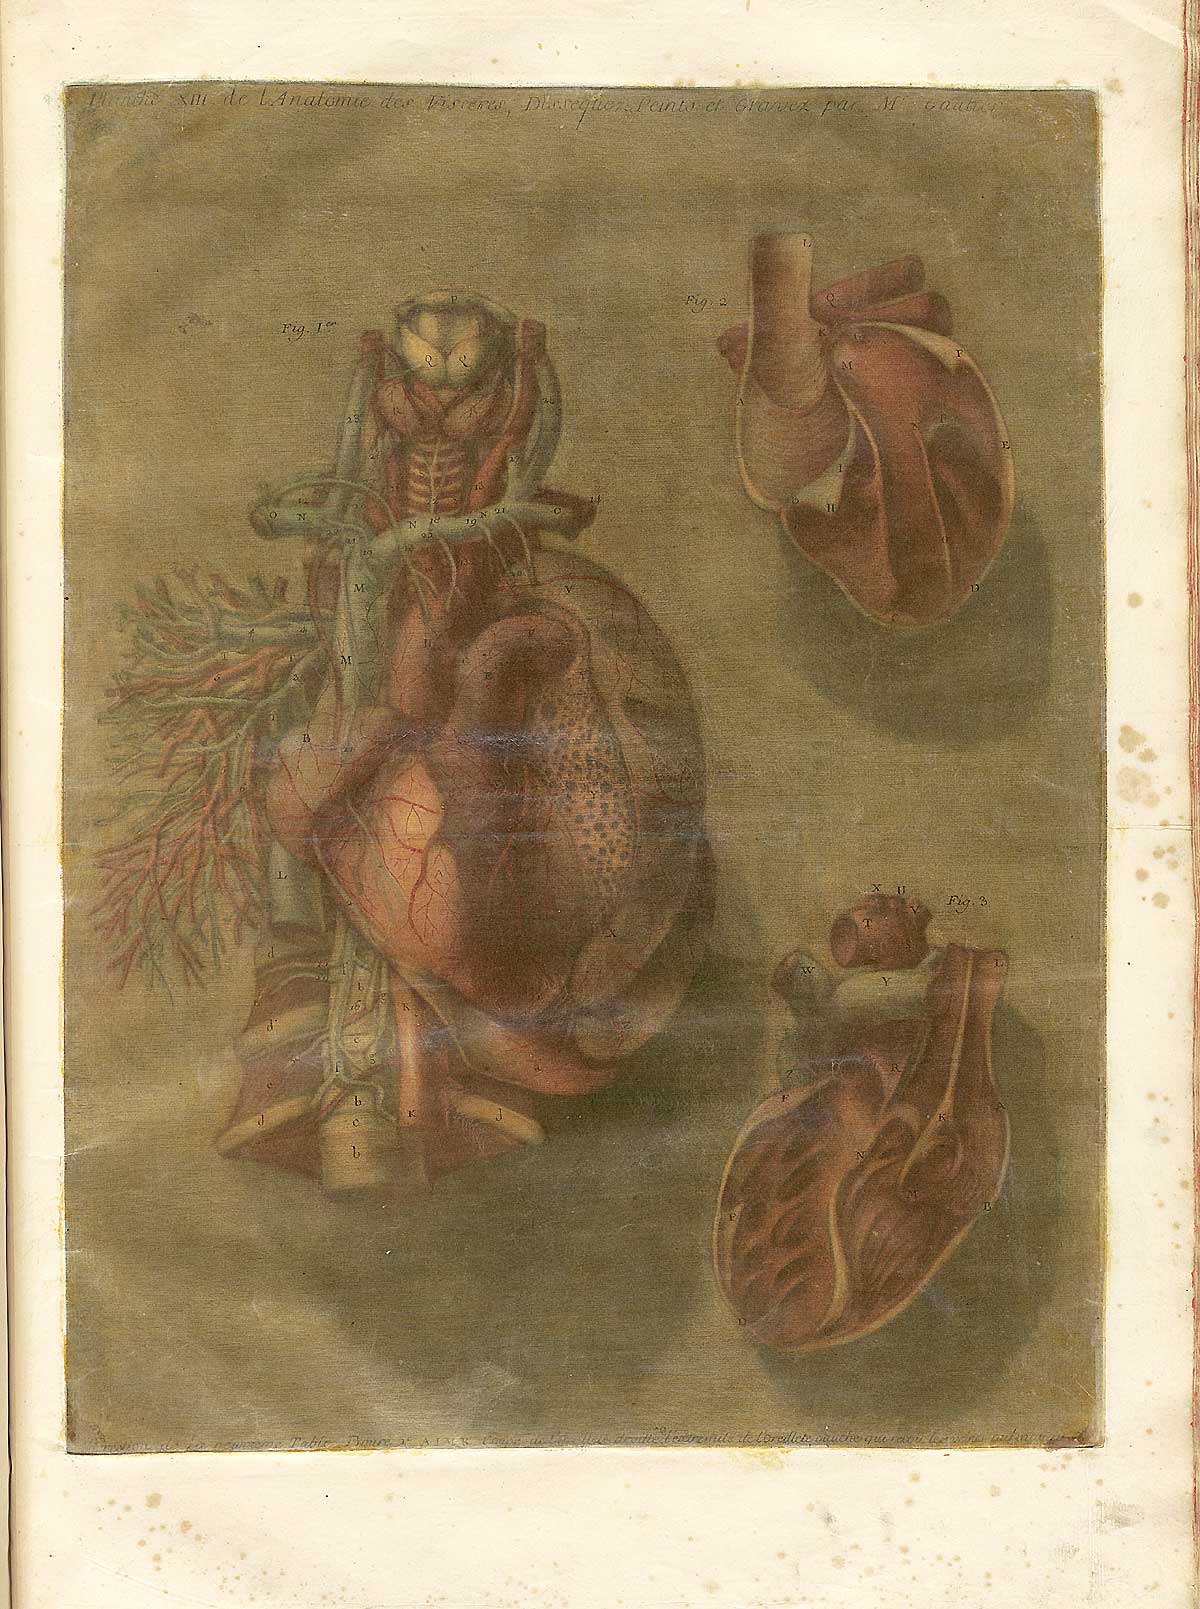 Color mezzotint of three views of the heart: the largest, in the center is a view from the front of the entire cardiovascular system with the trachea and spinal cord behind it; to the right at top and bottom are cross-sections of the heart; from Jacques Fabian Gautier d’Agoty’s Anatomie générale des viscères en situation, NLM Call no.: WZ 260 G283c 1745.